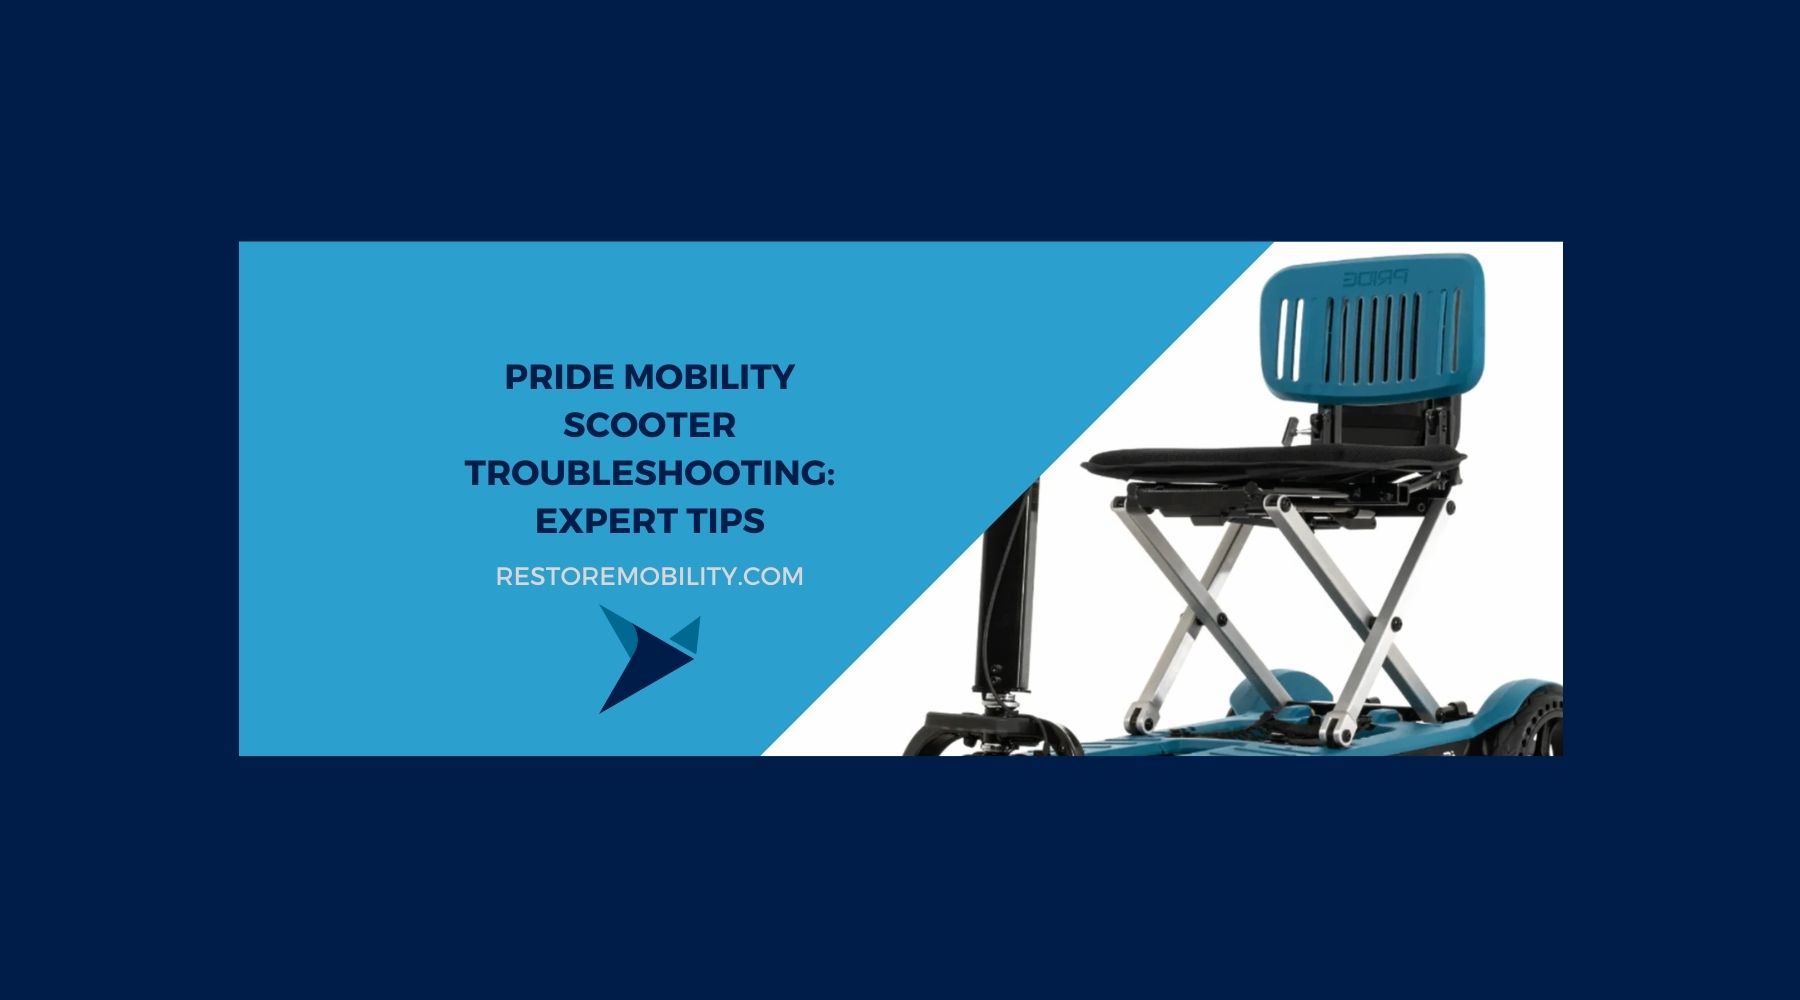 Pride Mobility Scooter Troubleshooting: Expert Tips